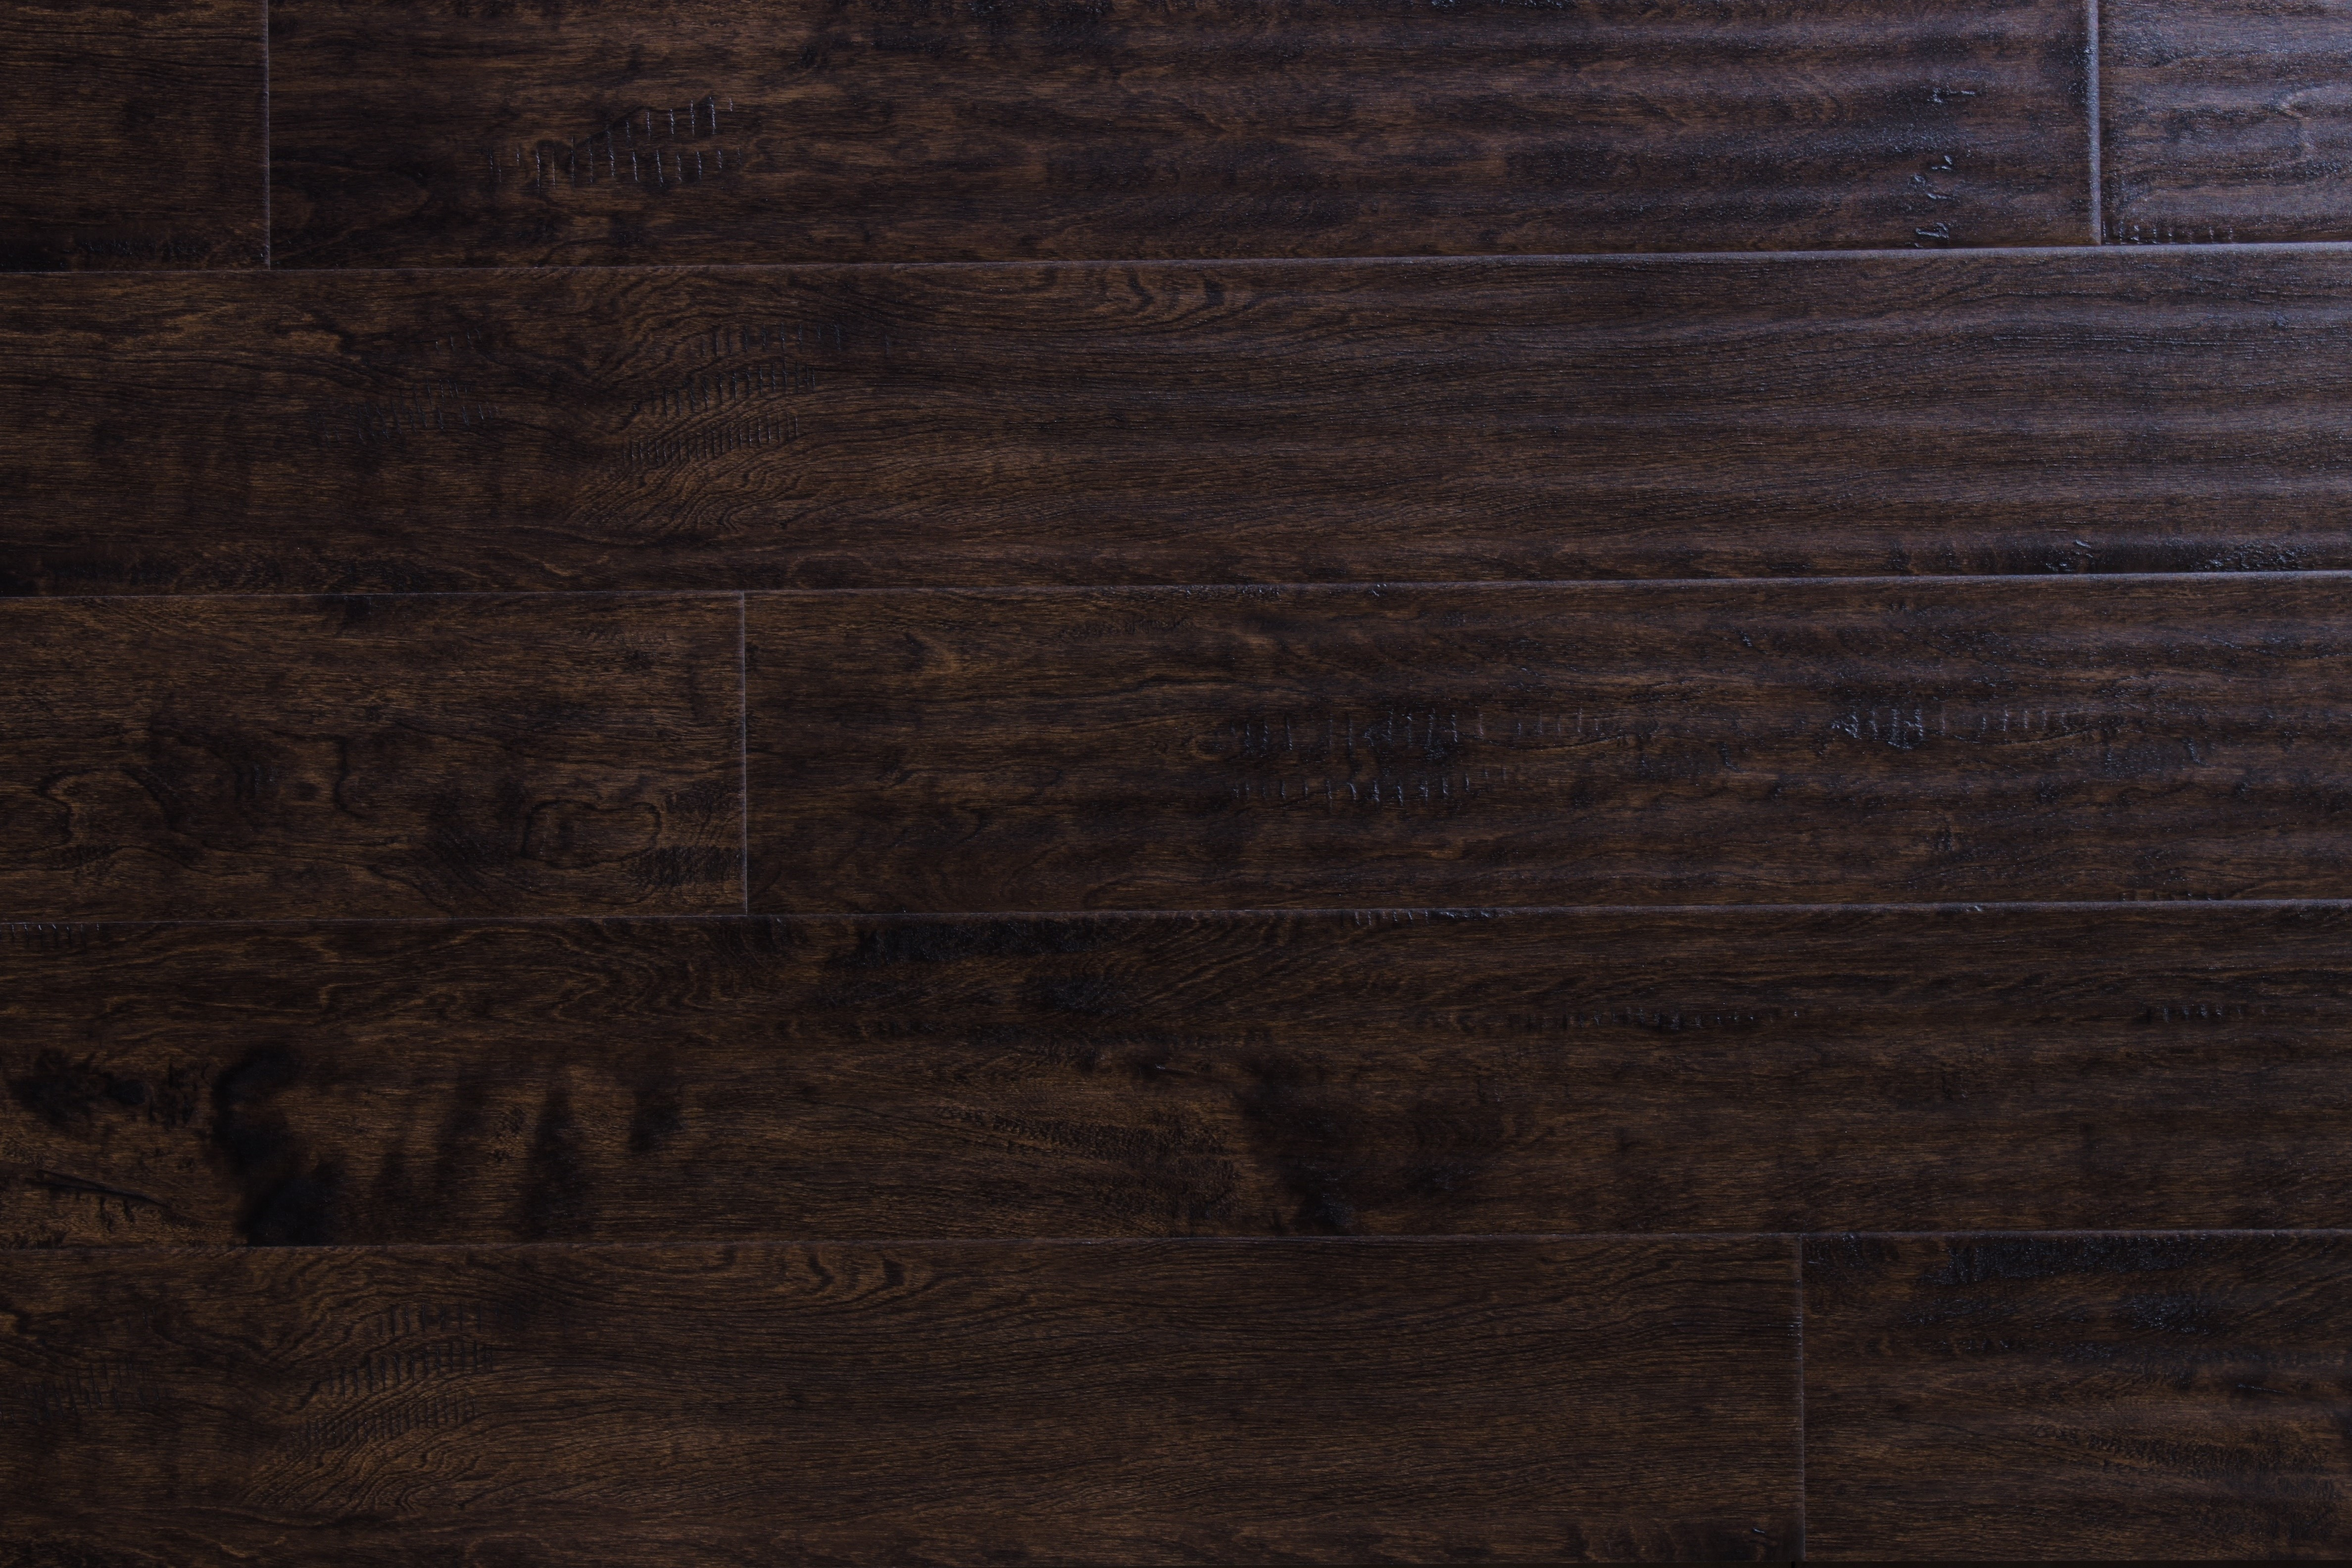 16 Unique Antique Hickory Hardwood Flooring 2024 free download antique hickory hardwood flooring of wood flooring free samples available at builddirecta within tailor multi gb 5874277bb8d3c